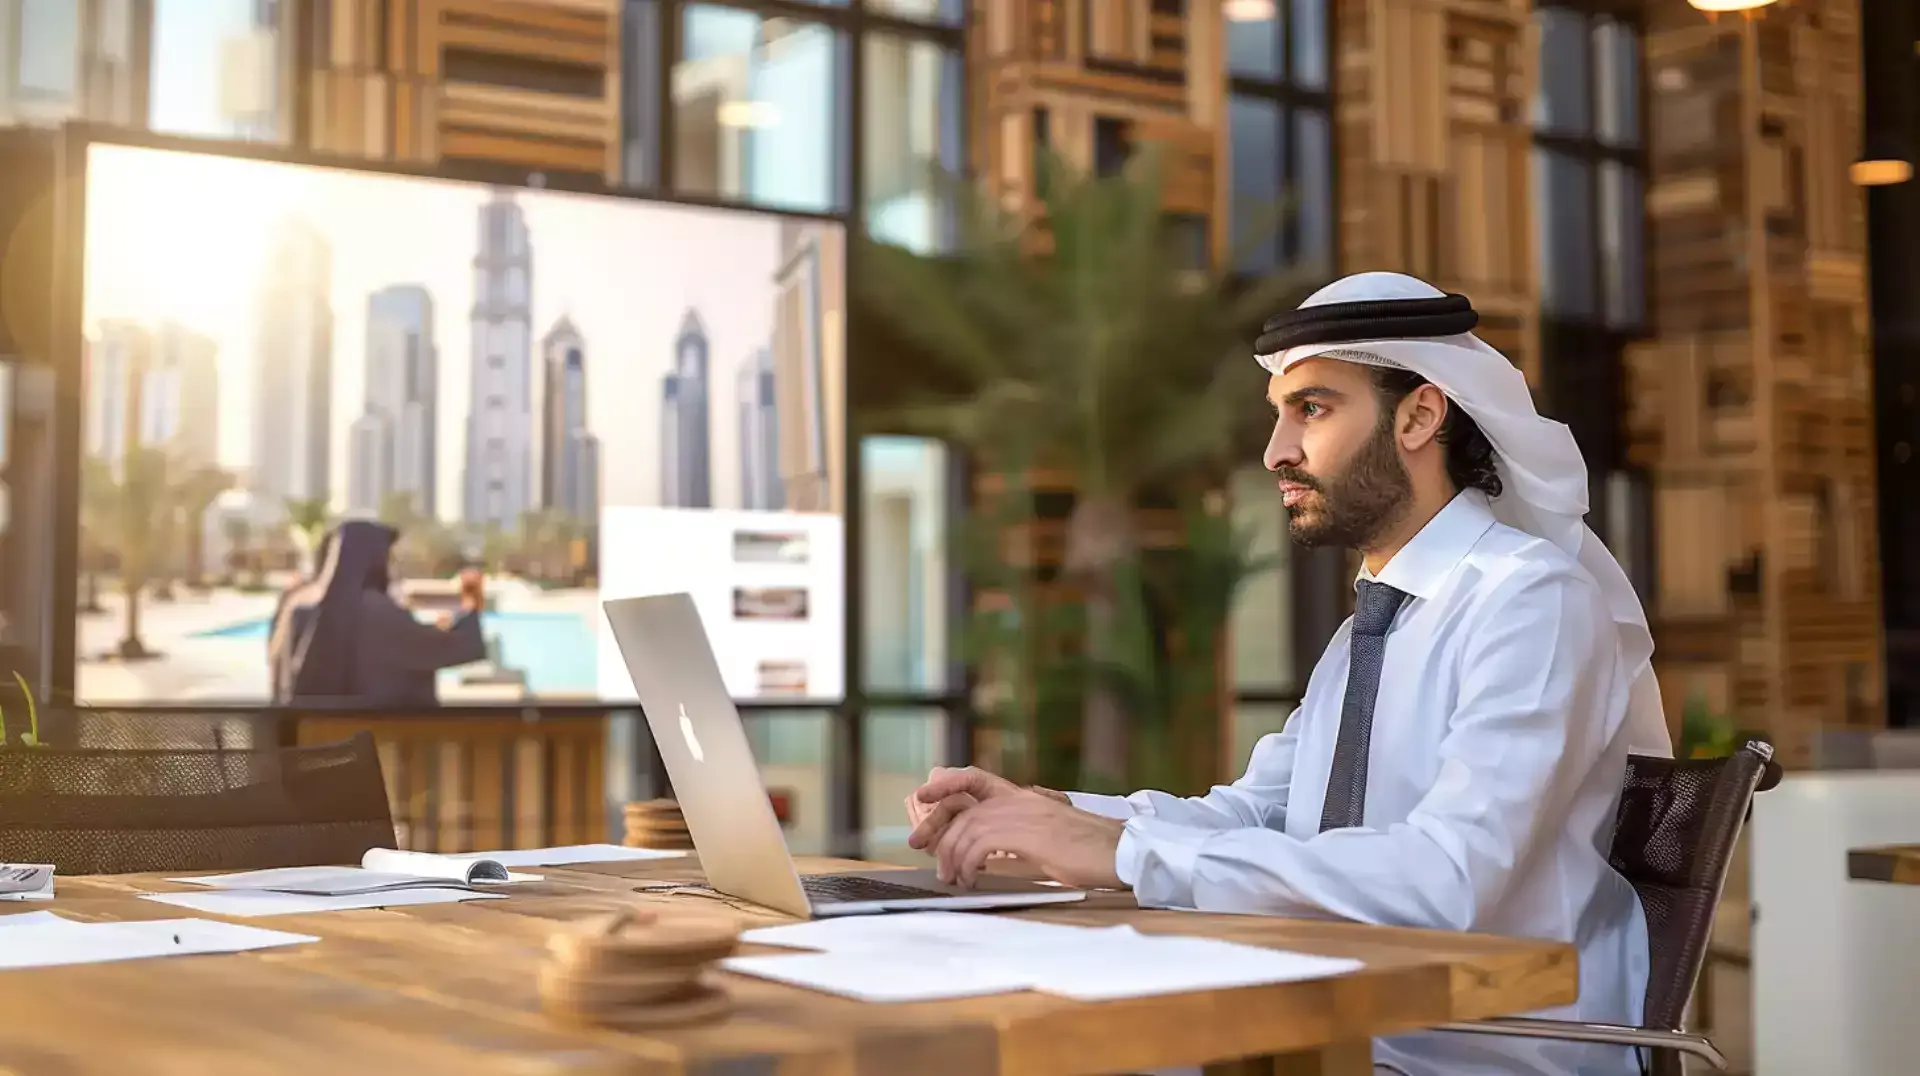 A real estate agent presenting a property investment plan in Dubai